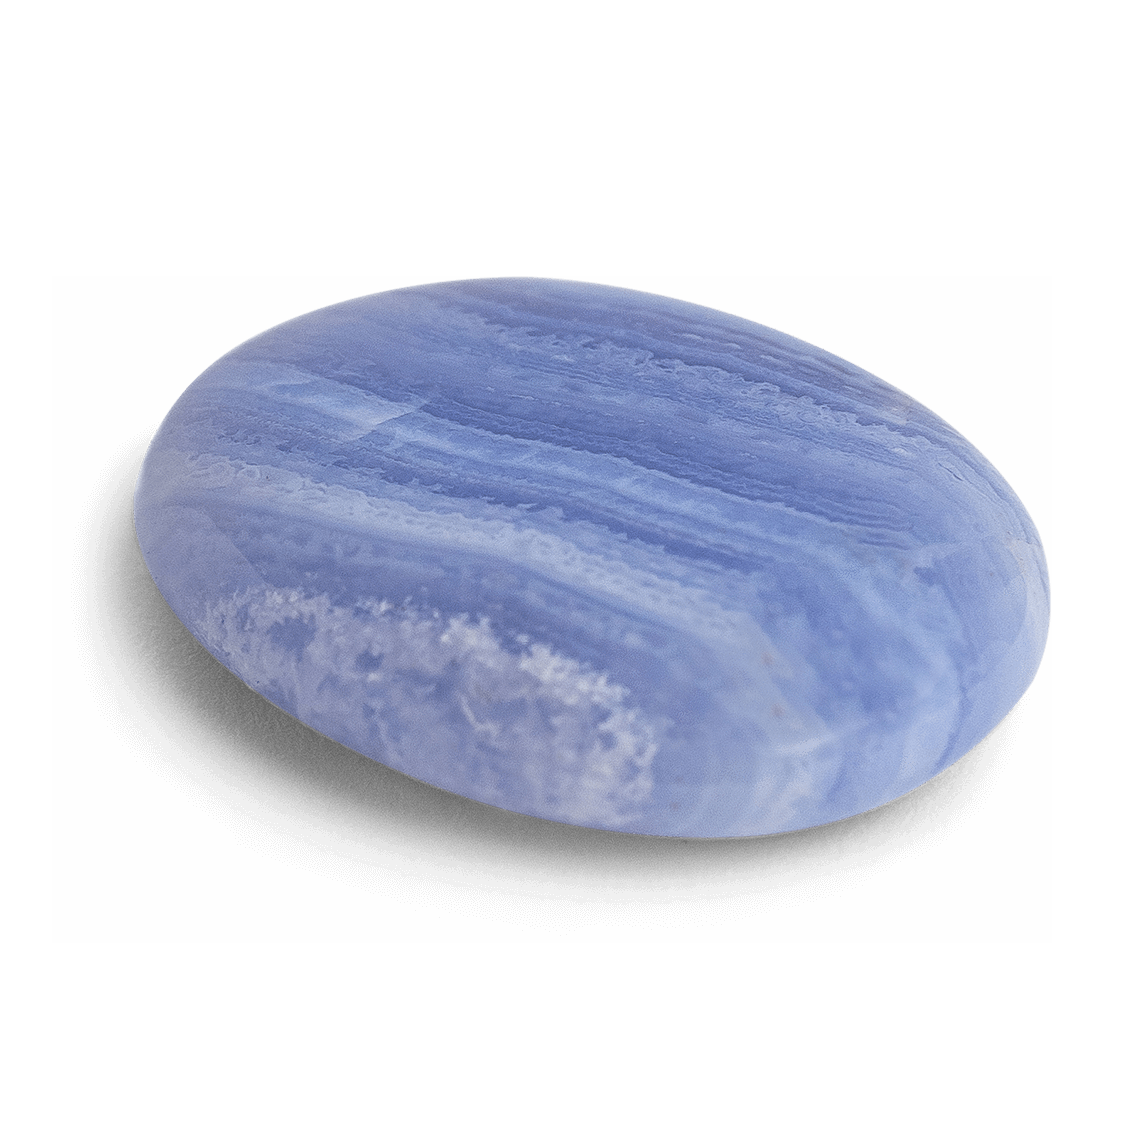 Blue Lace Agate Touchstone